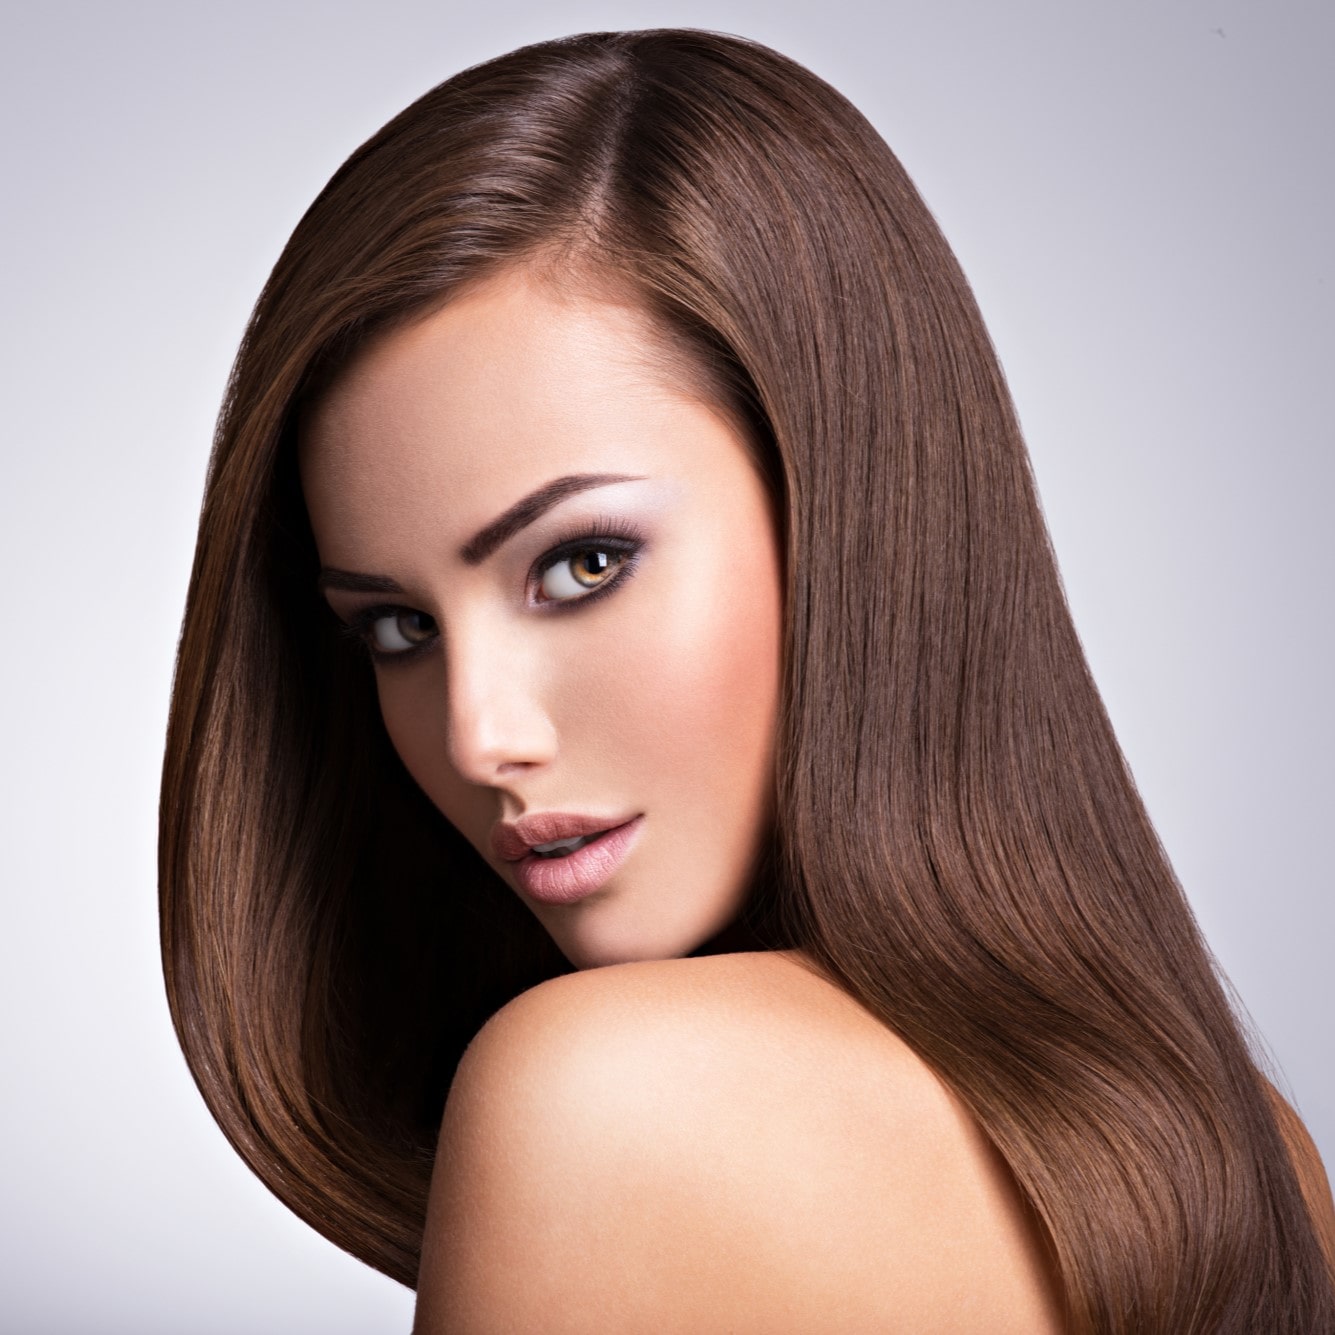 Indian smoothing hair straightening service in Brussels, Belgium for women